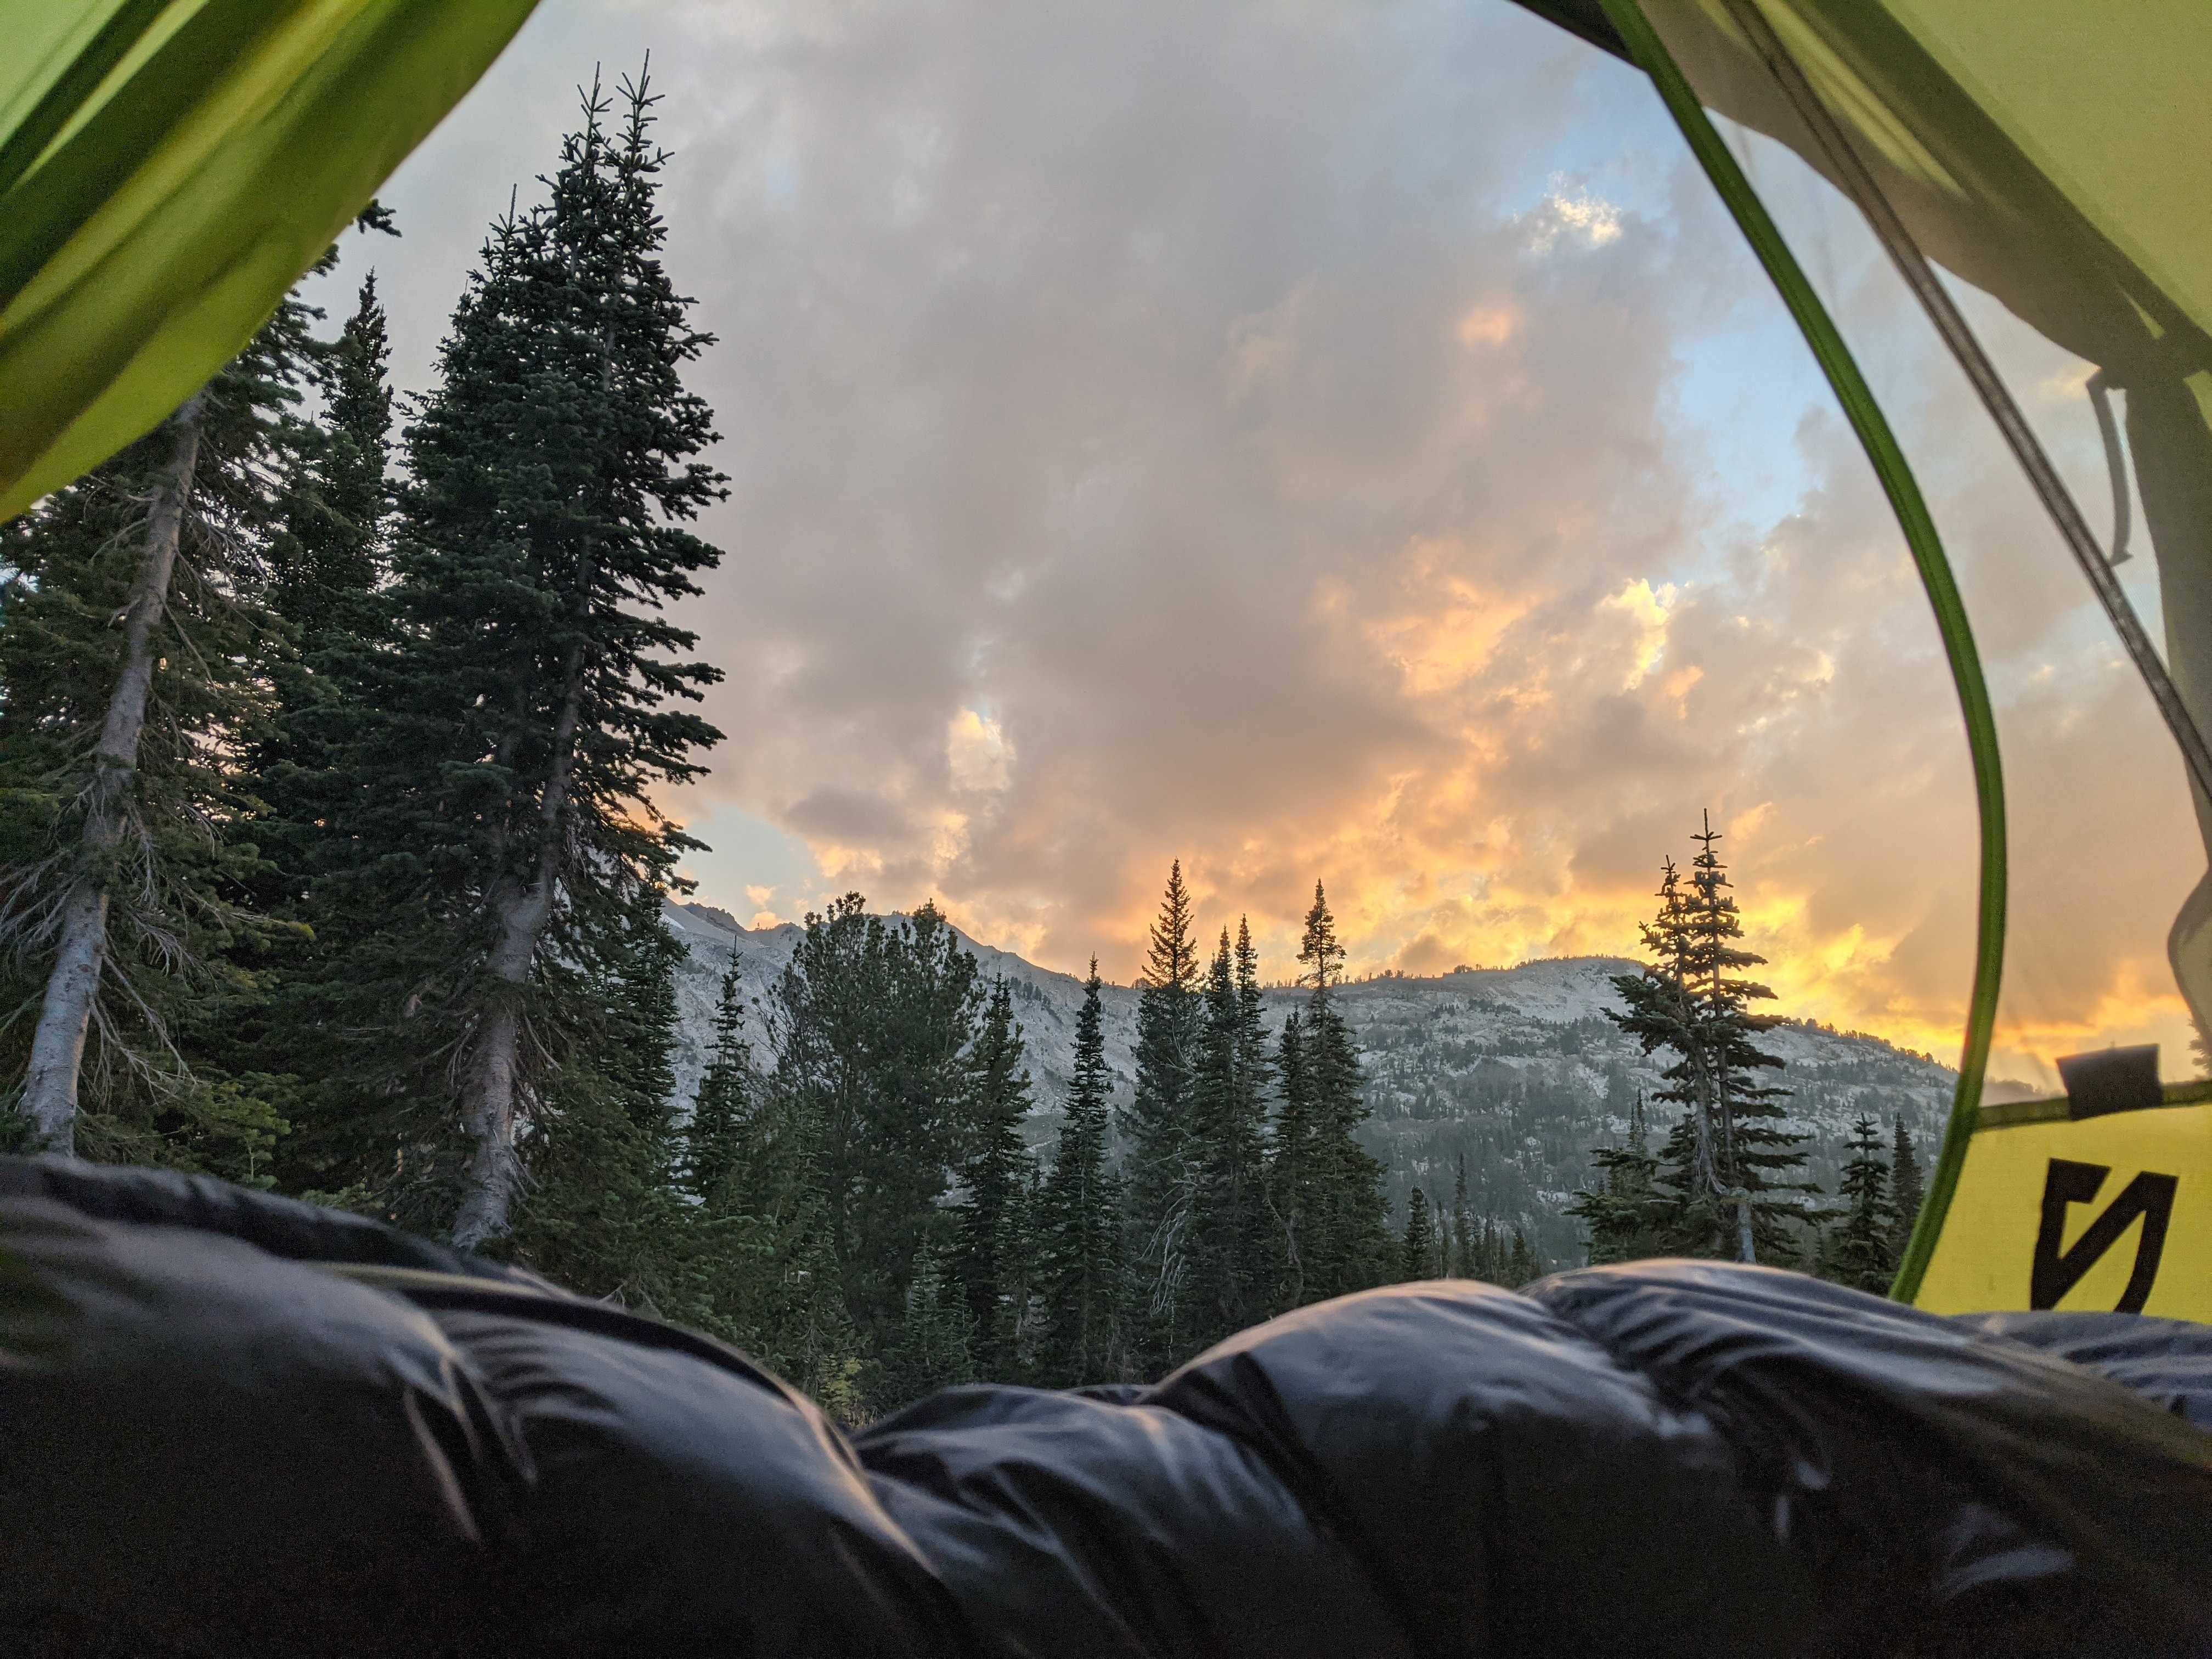 Camper submitted image from Wallowa-Whitman National Forest, Mirror Lake BackCountry Sites - 2